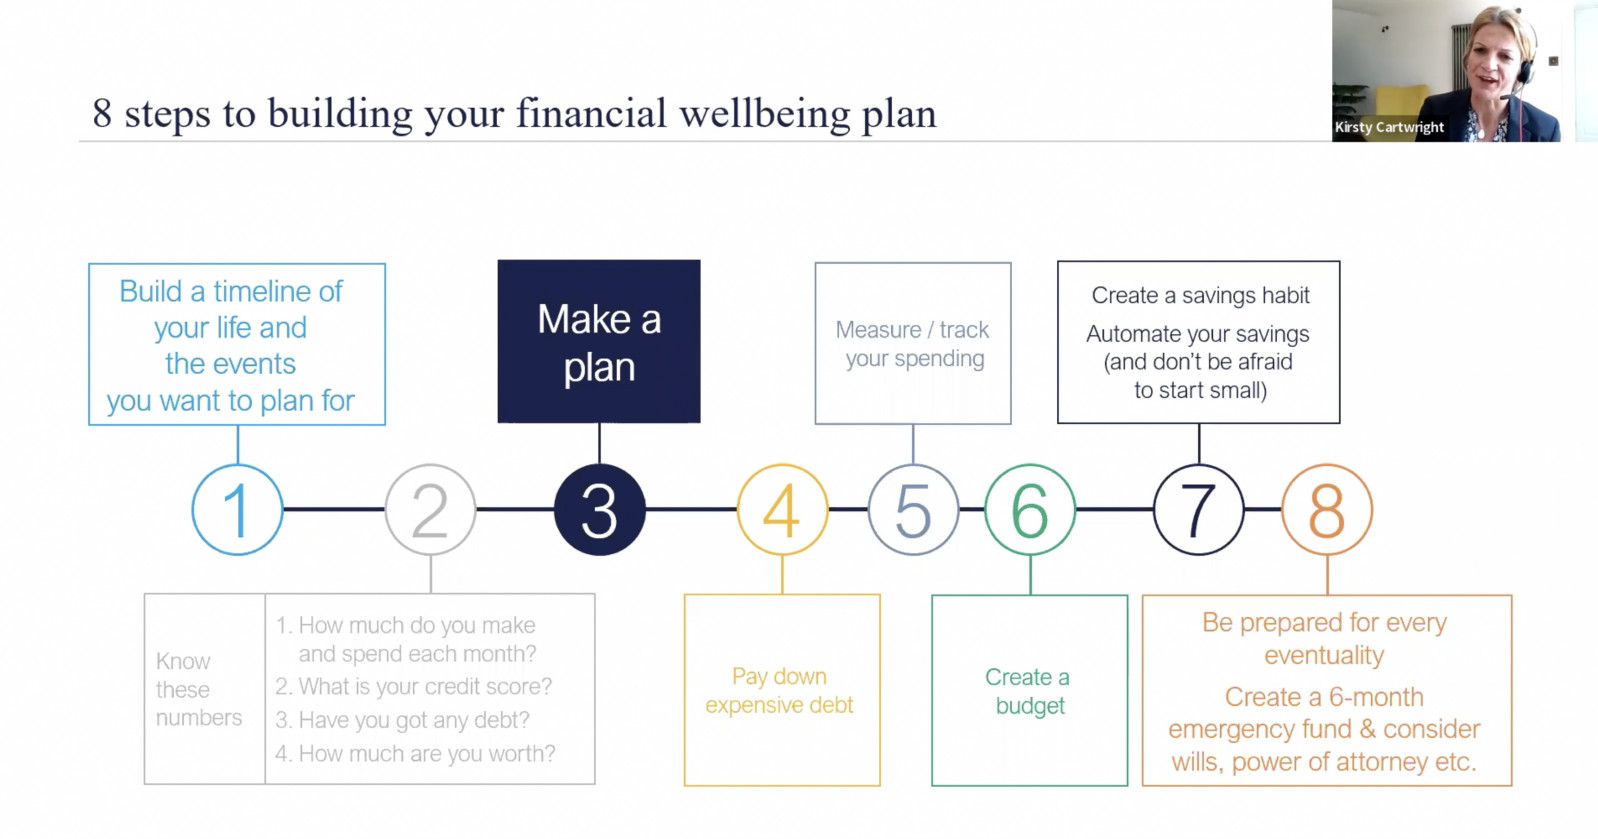 Your 8 Step Plan for Financial Wellbeing